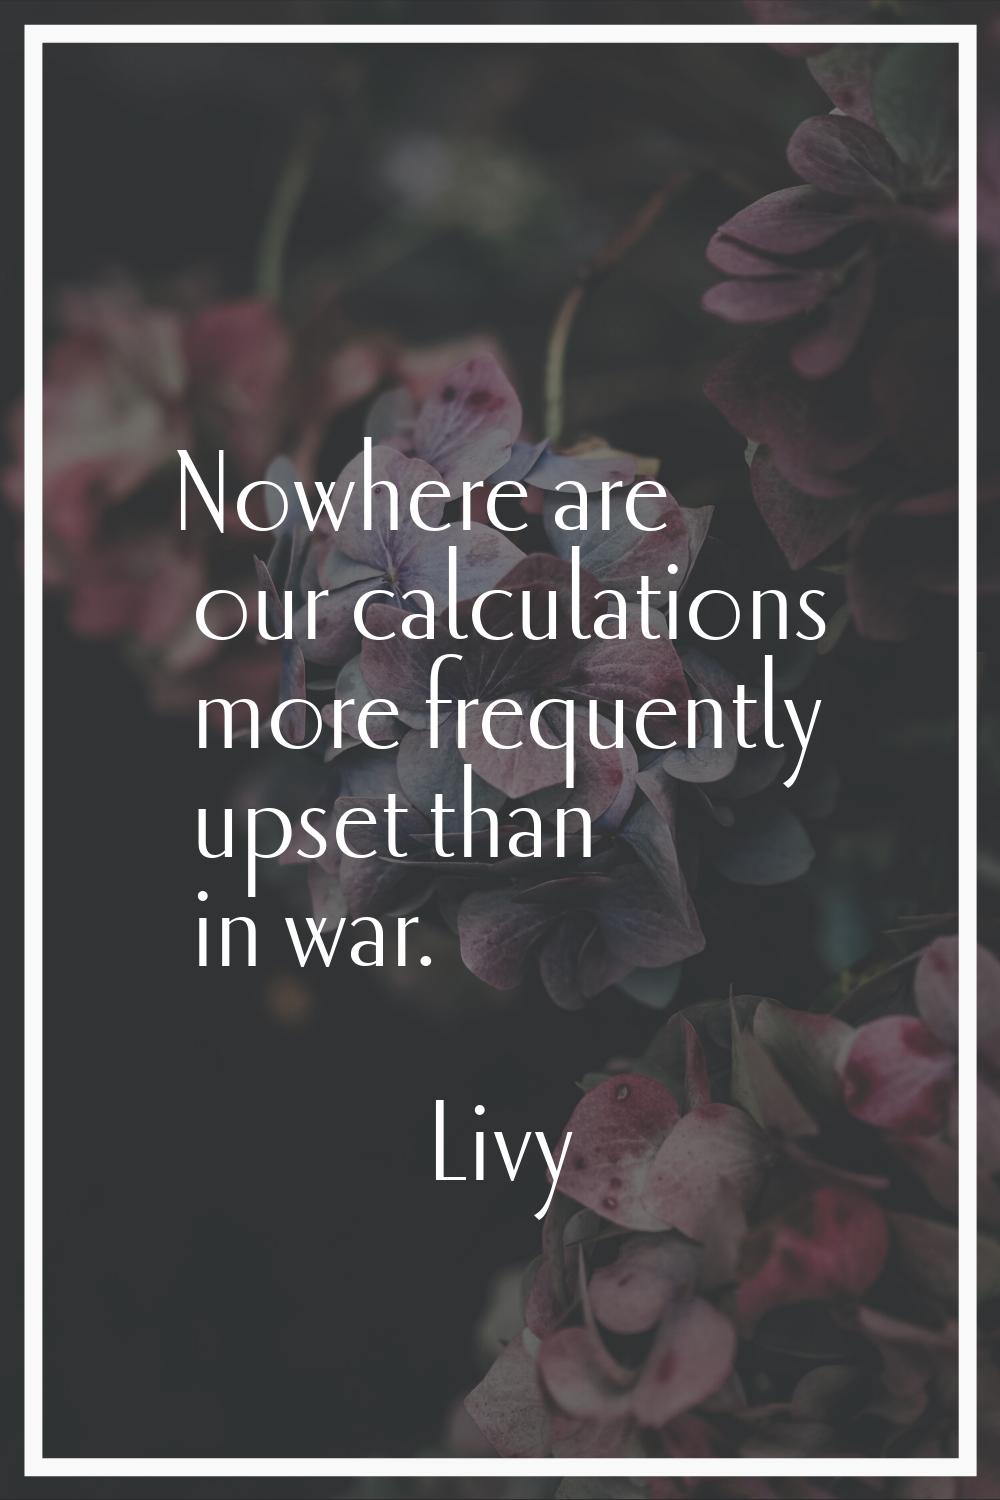 Nowhere are our calculations more frequently upset than in war.